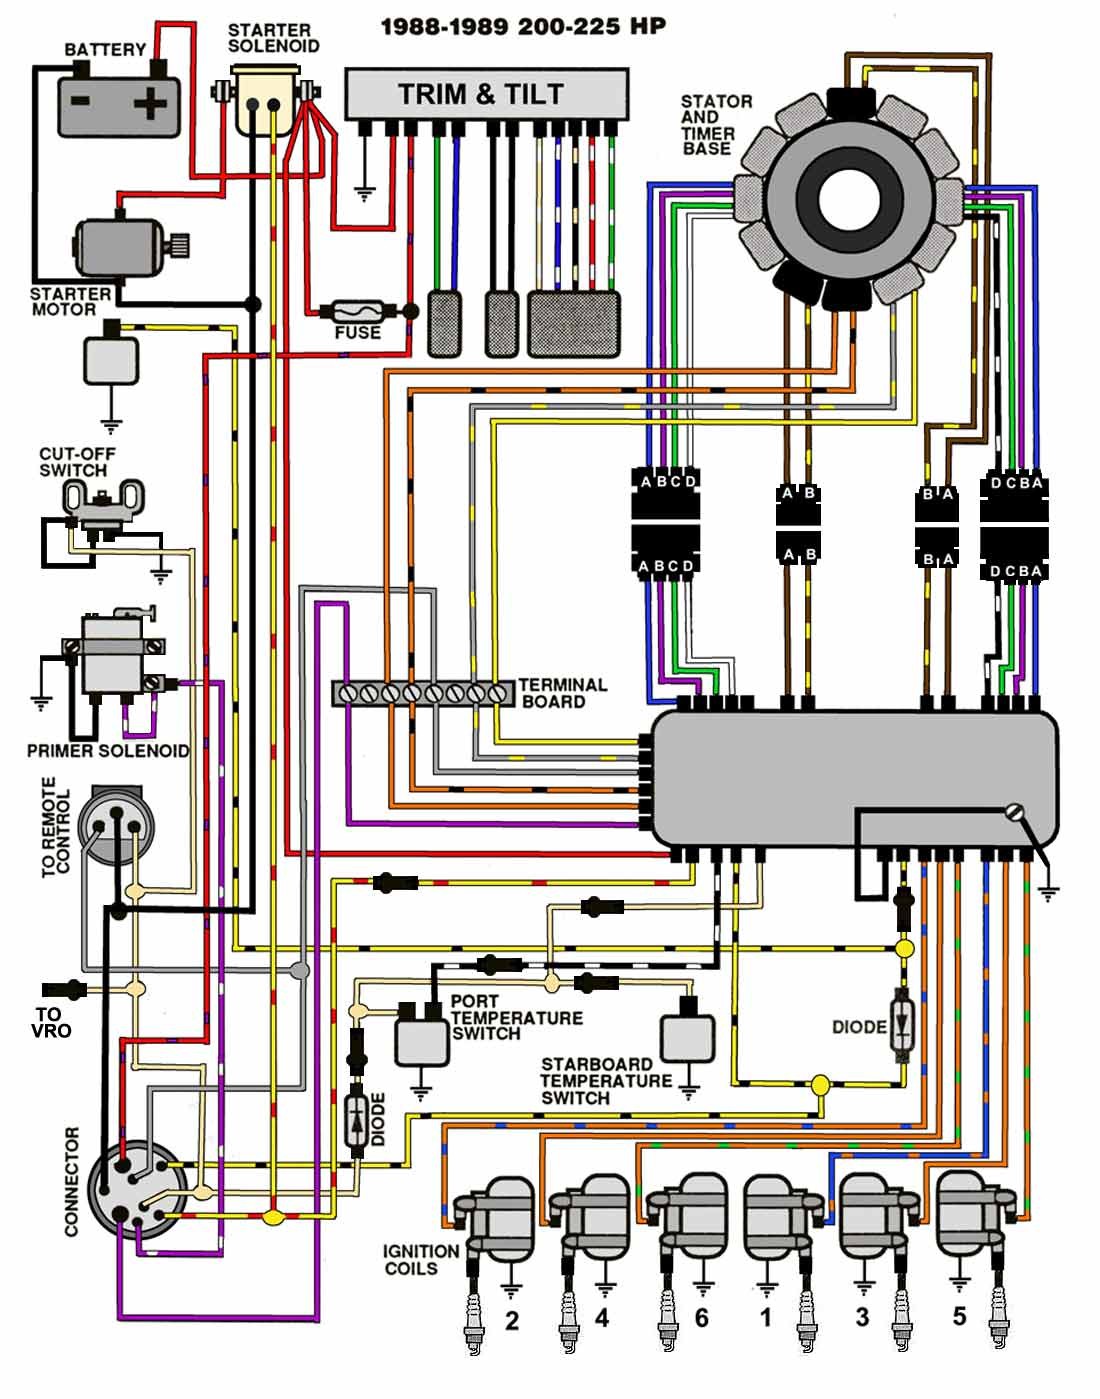 Ignition Johnson Outboard Starter Solenoid Wiring Diagram from mainetreasurechest.com